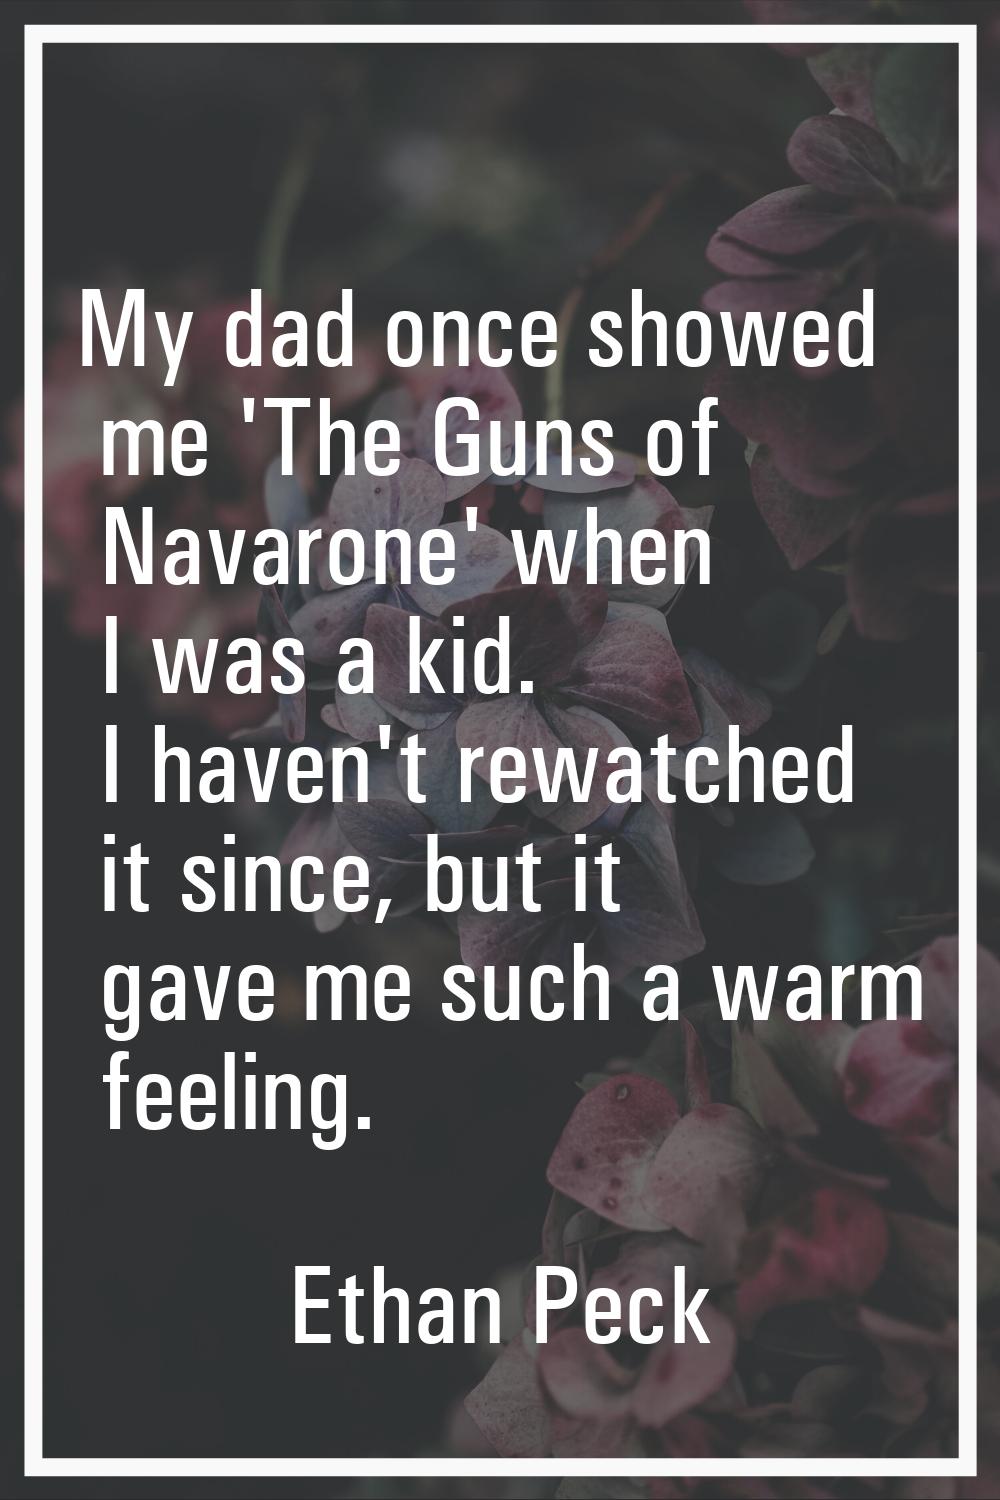 My dad once showed me 'The Guns of Navarone' when I was a kid. I haven't rewatched it since, but it